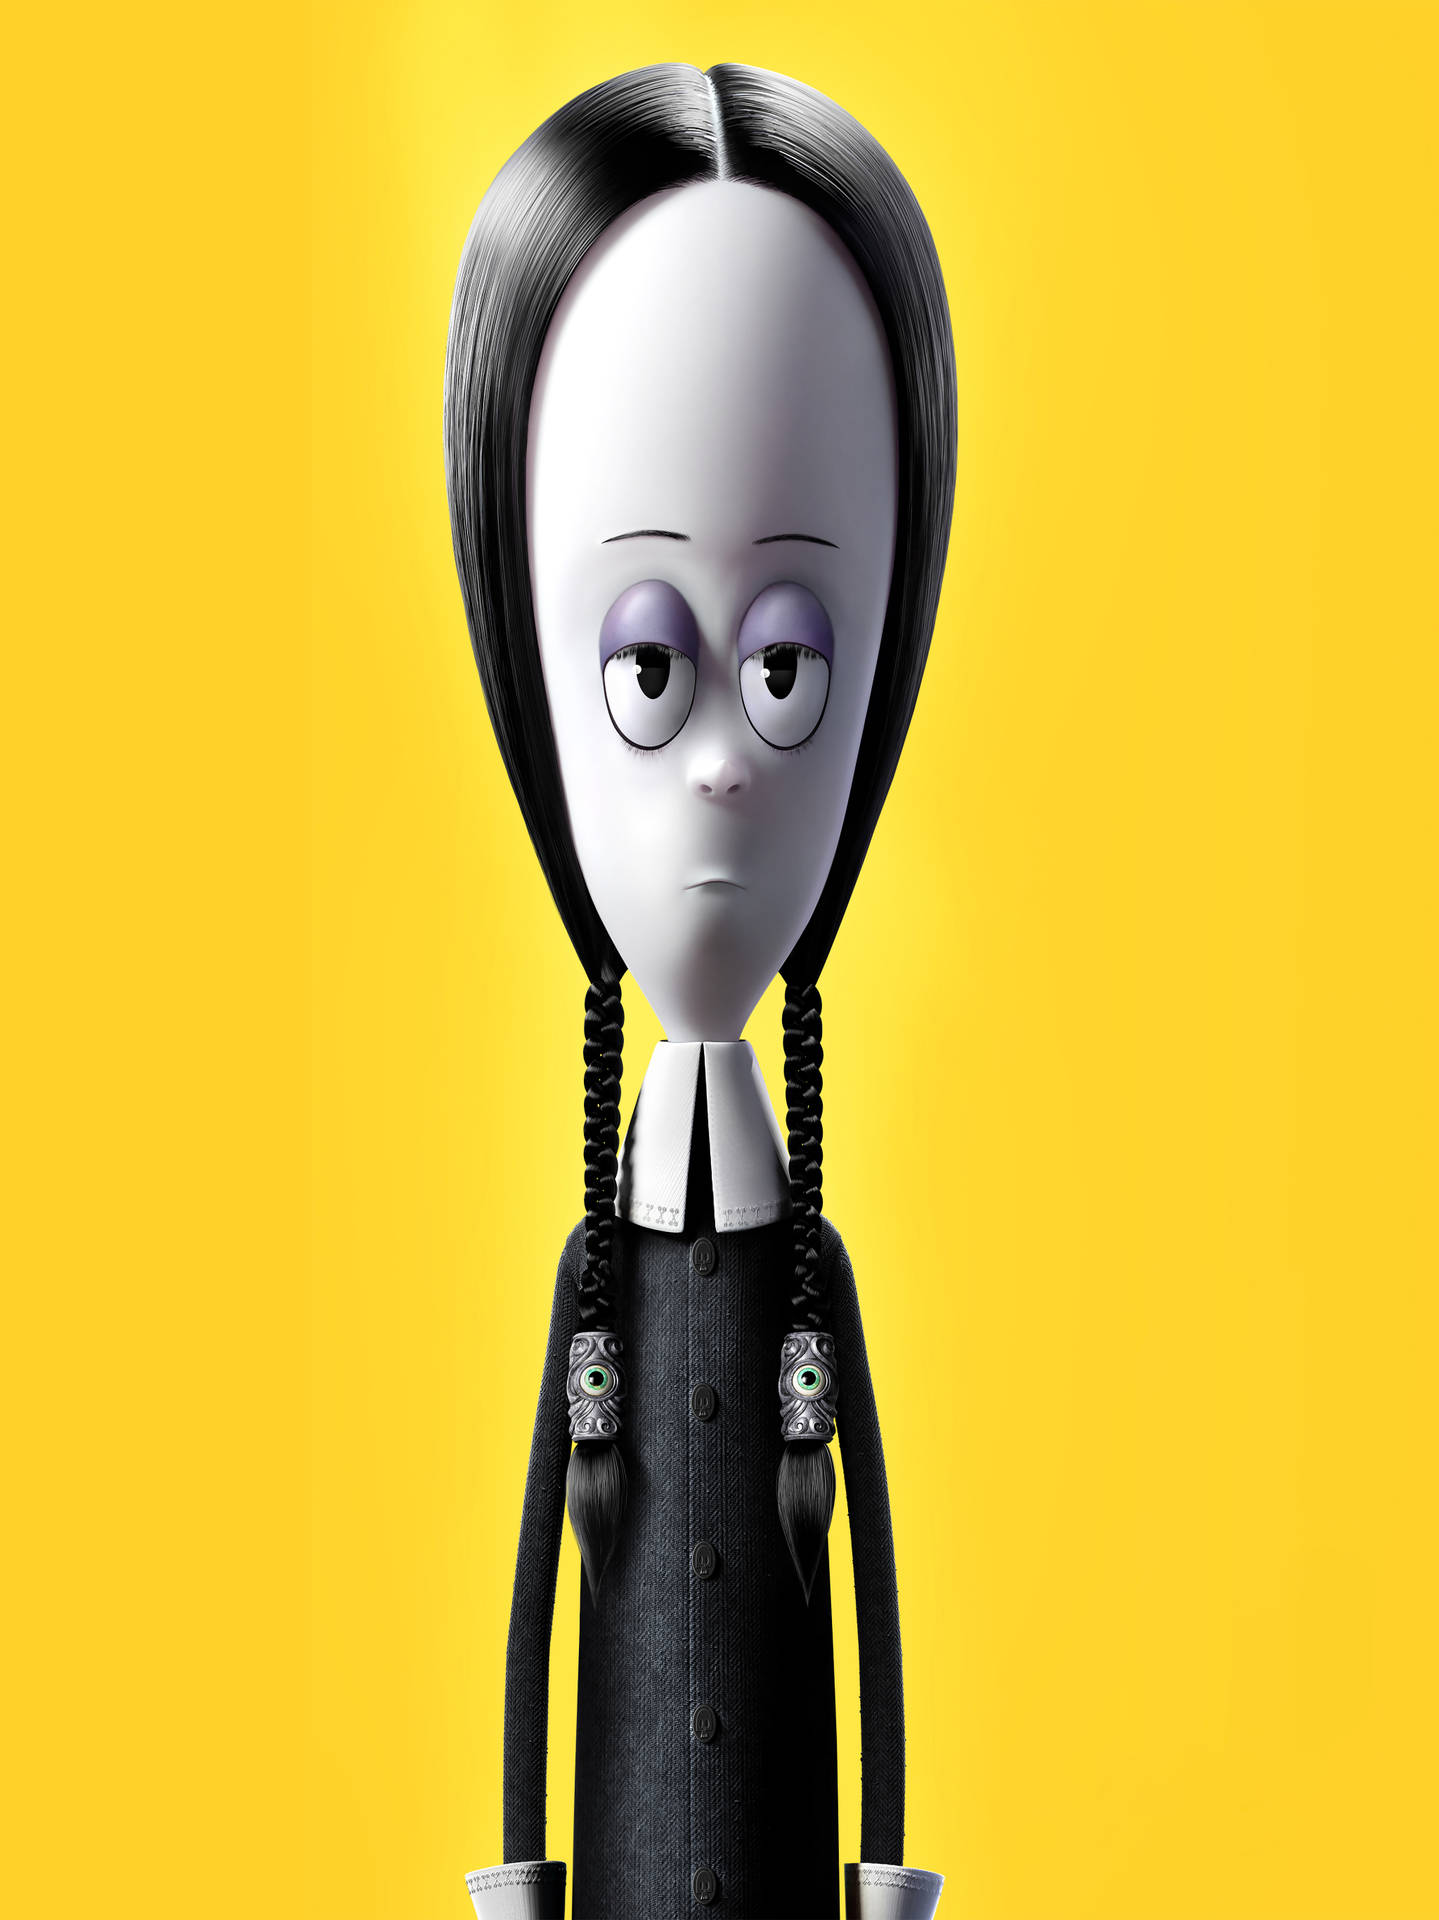 Wednesday The Addams Family 2 Yellow Backdrop Wallpaper